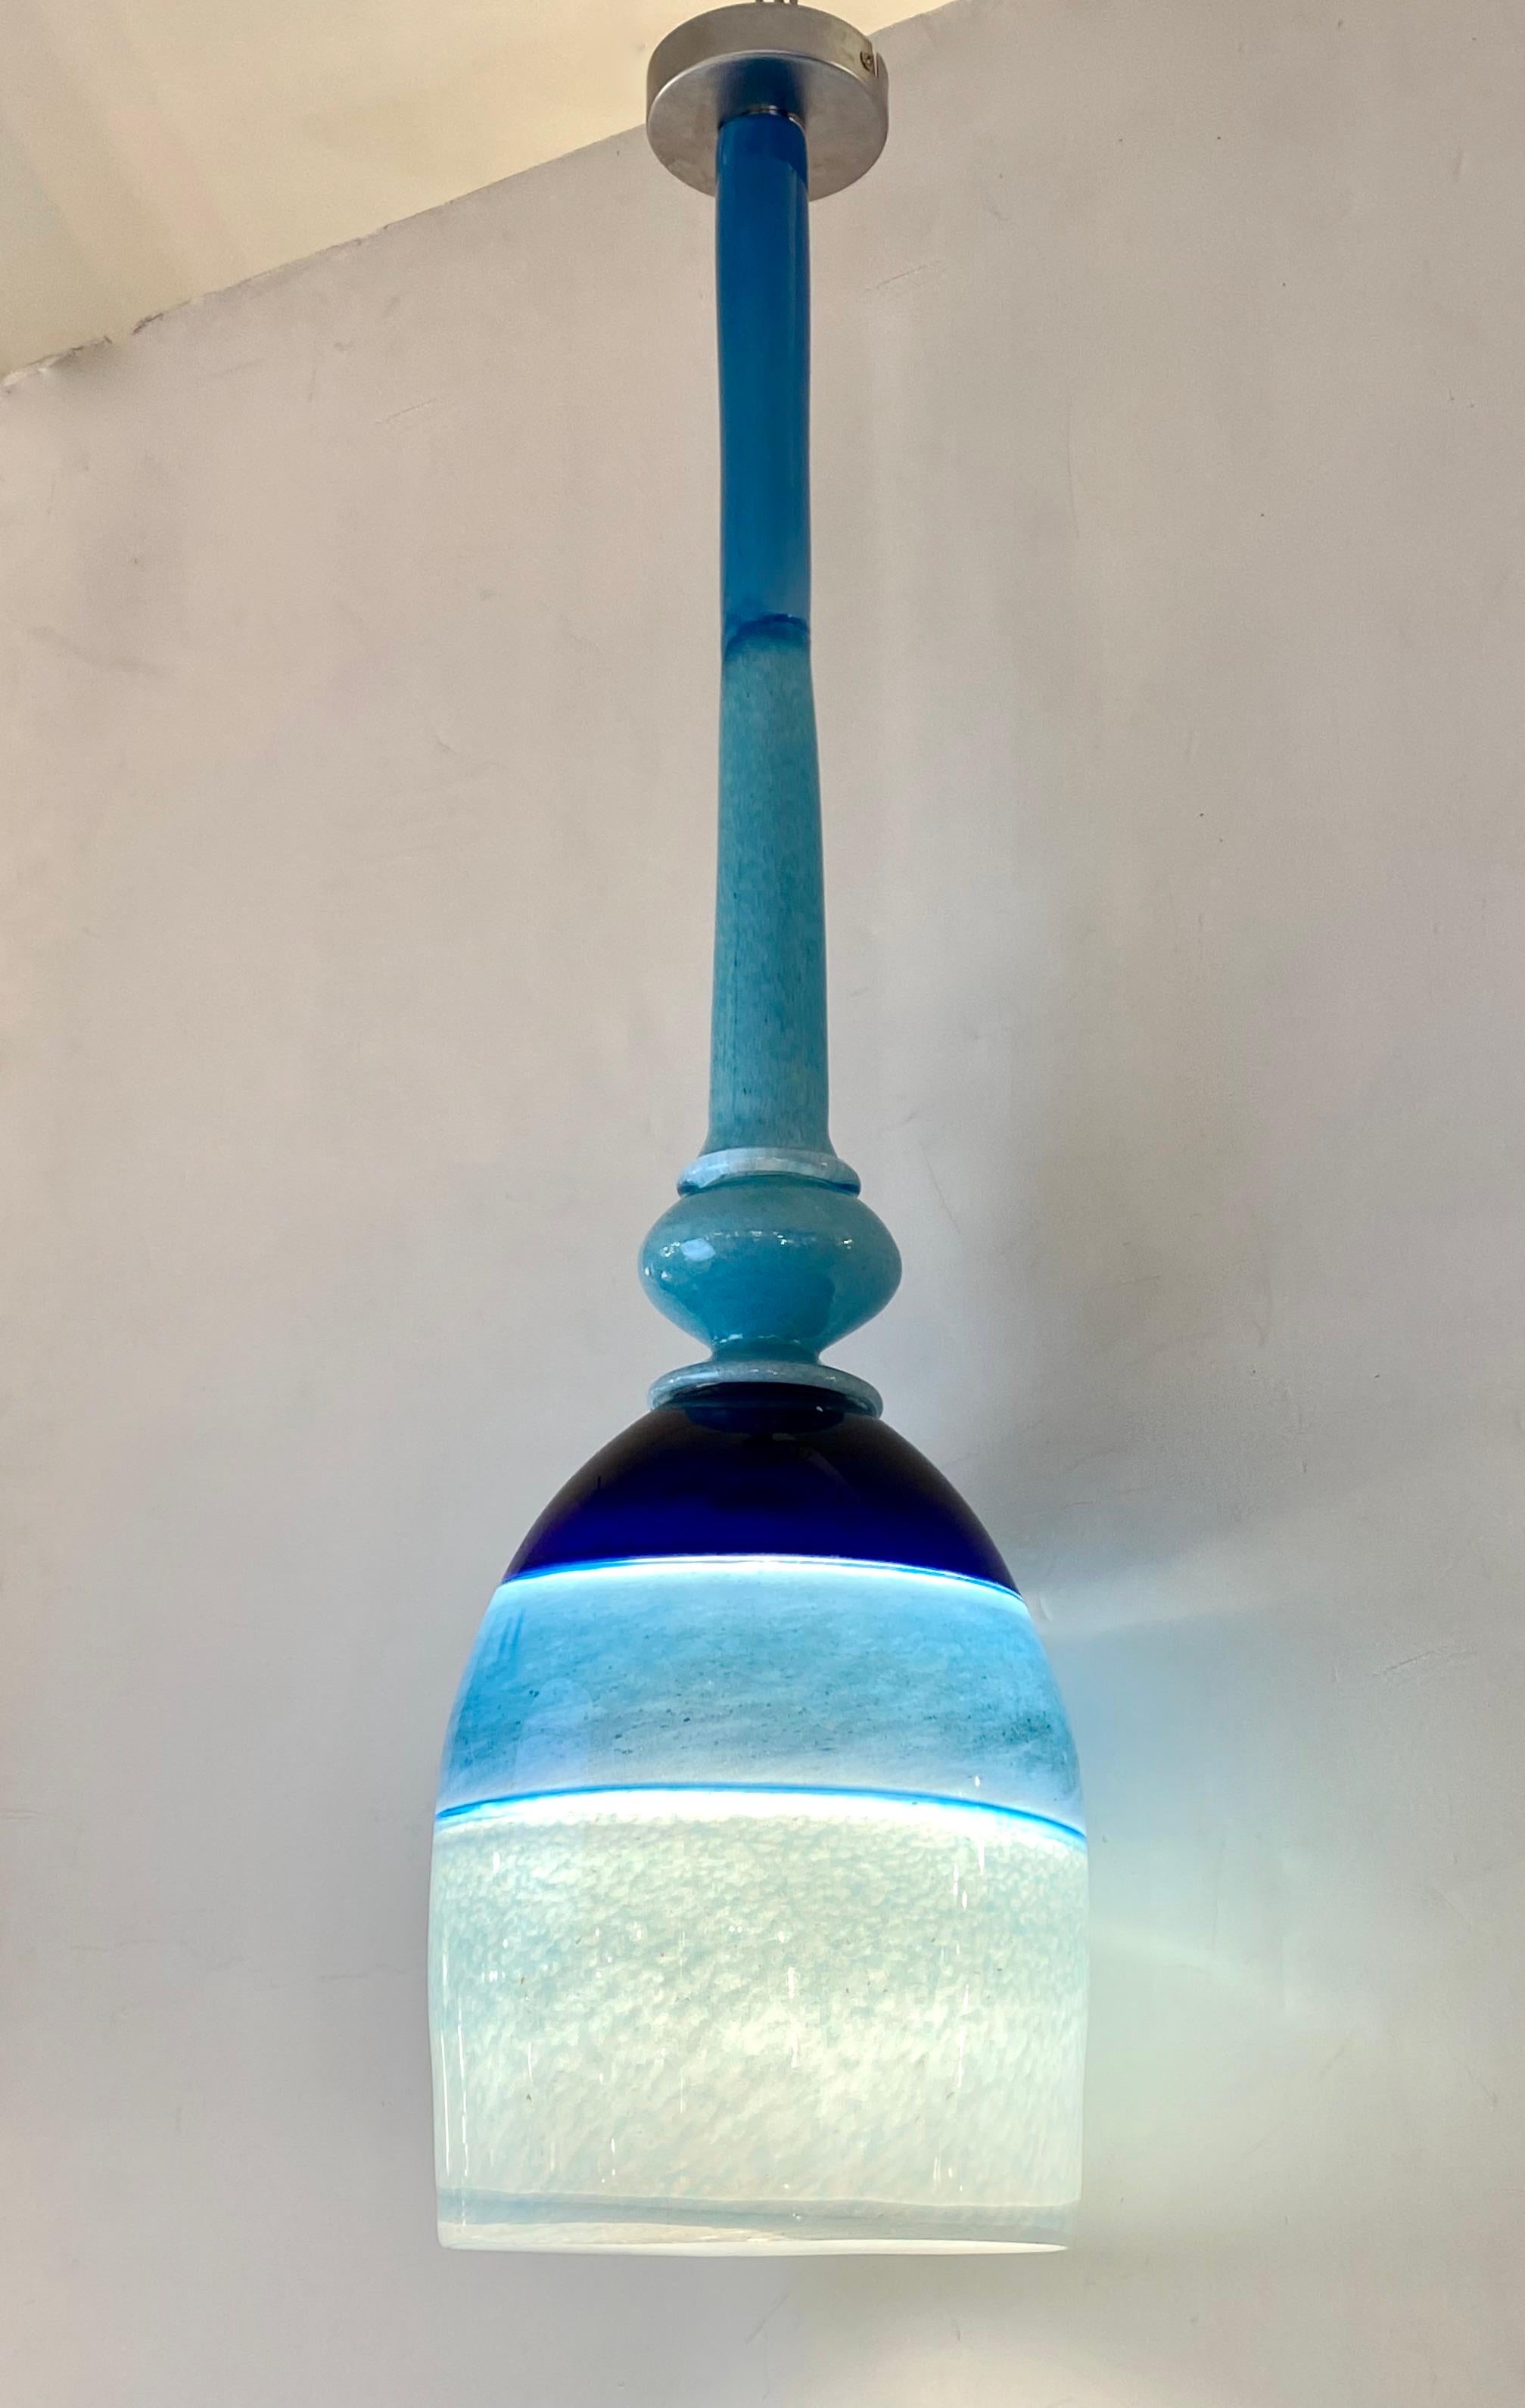 Fun and elegant Italian contemporary custom-made chandelier pendant light, entirely handmade, of organic modern design consisting of a blown Murano glass shade in 3 colors: black, turquoise, mottled aquamarine fused with the difficult incalmo